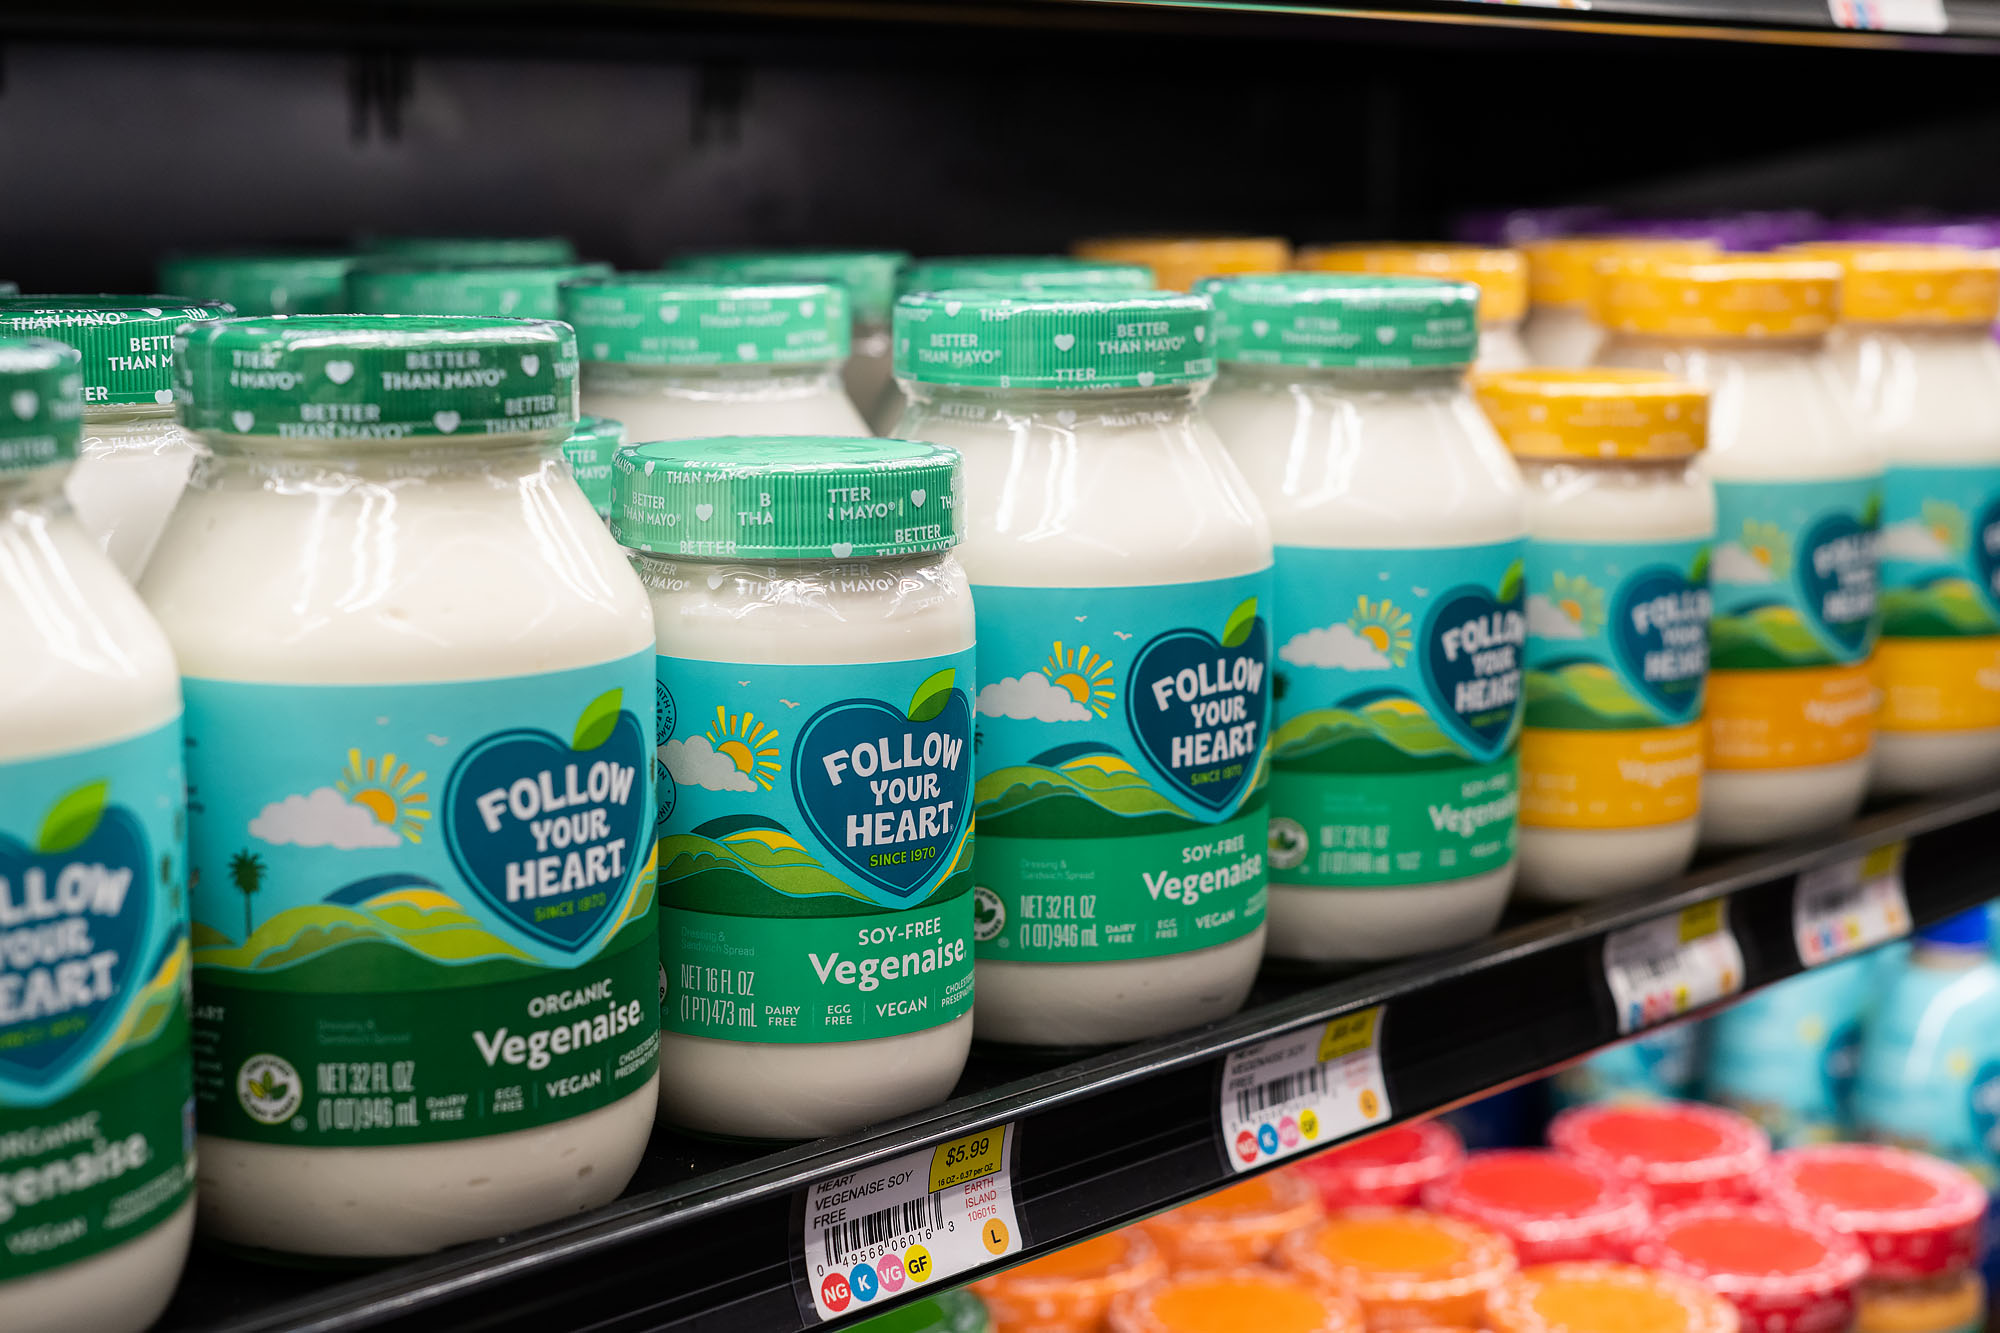 Rows of Vegenaise in a refrigerated display case.